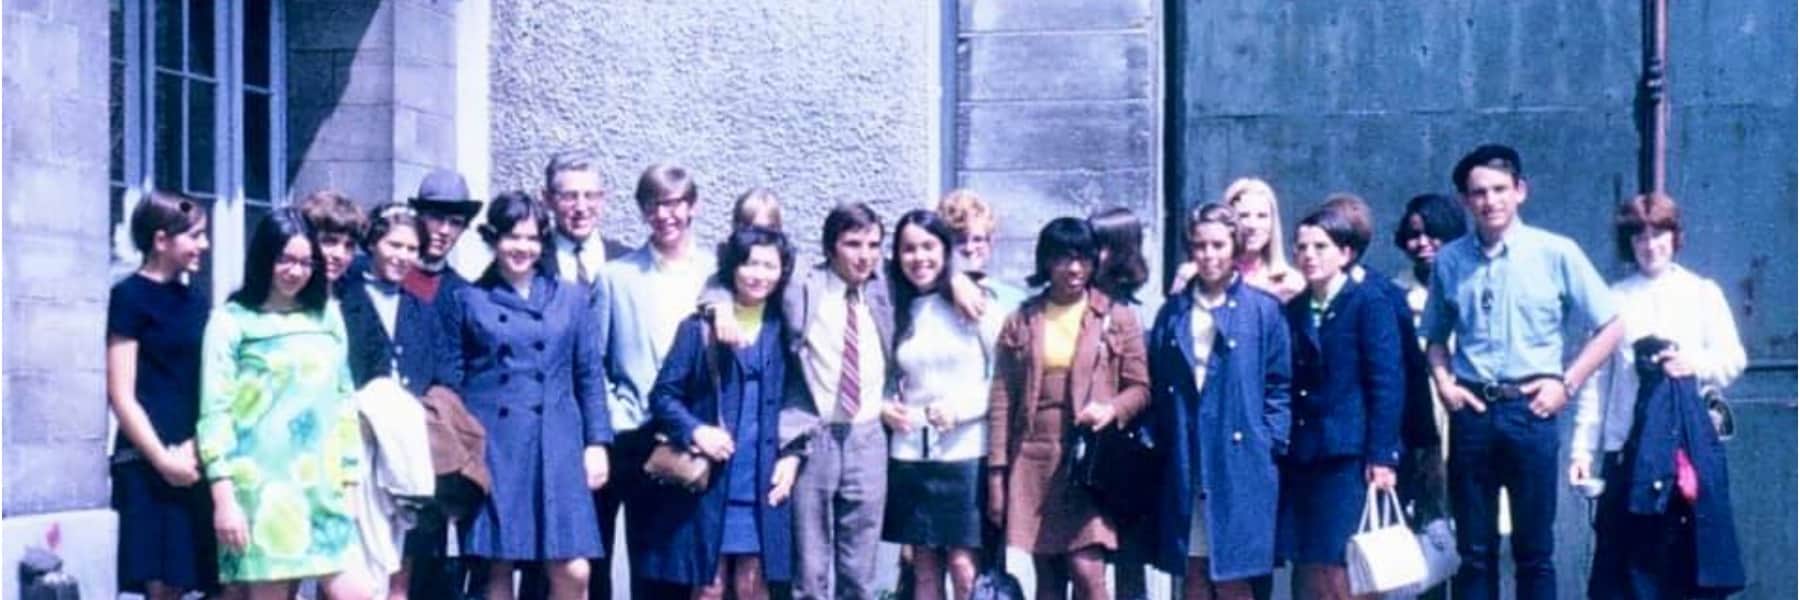 Students pose in 1968 in front of a wall